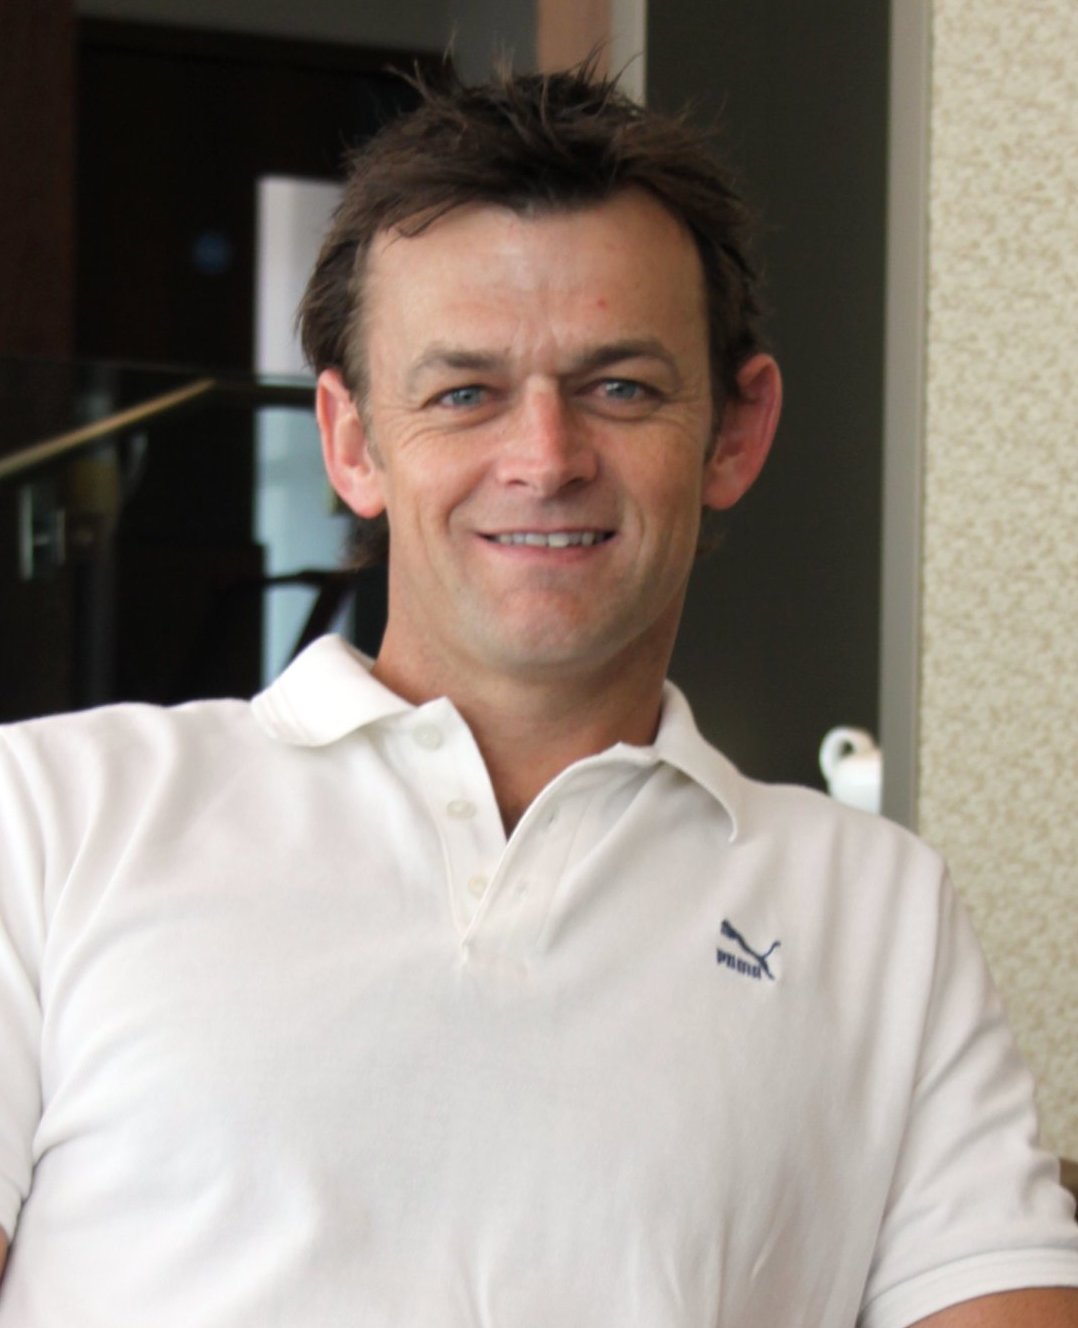 BCCI should allow Indian cricketers to participate in foreign T20 leagues: Gilchrist